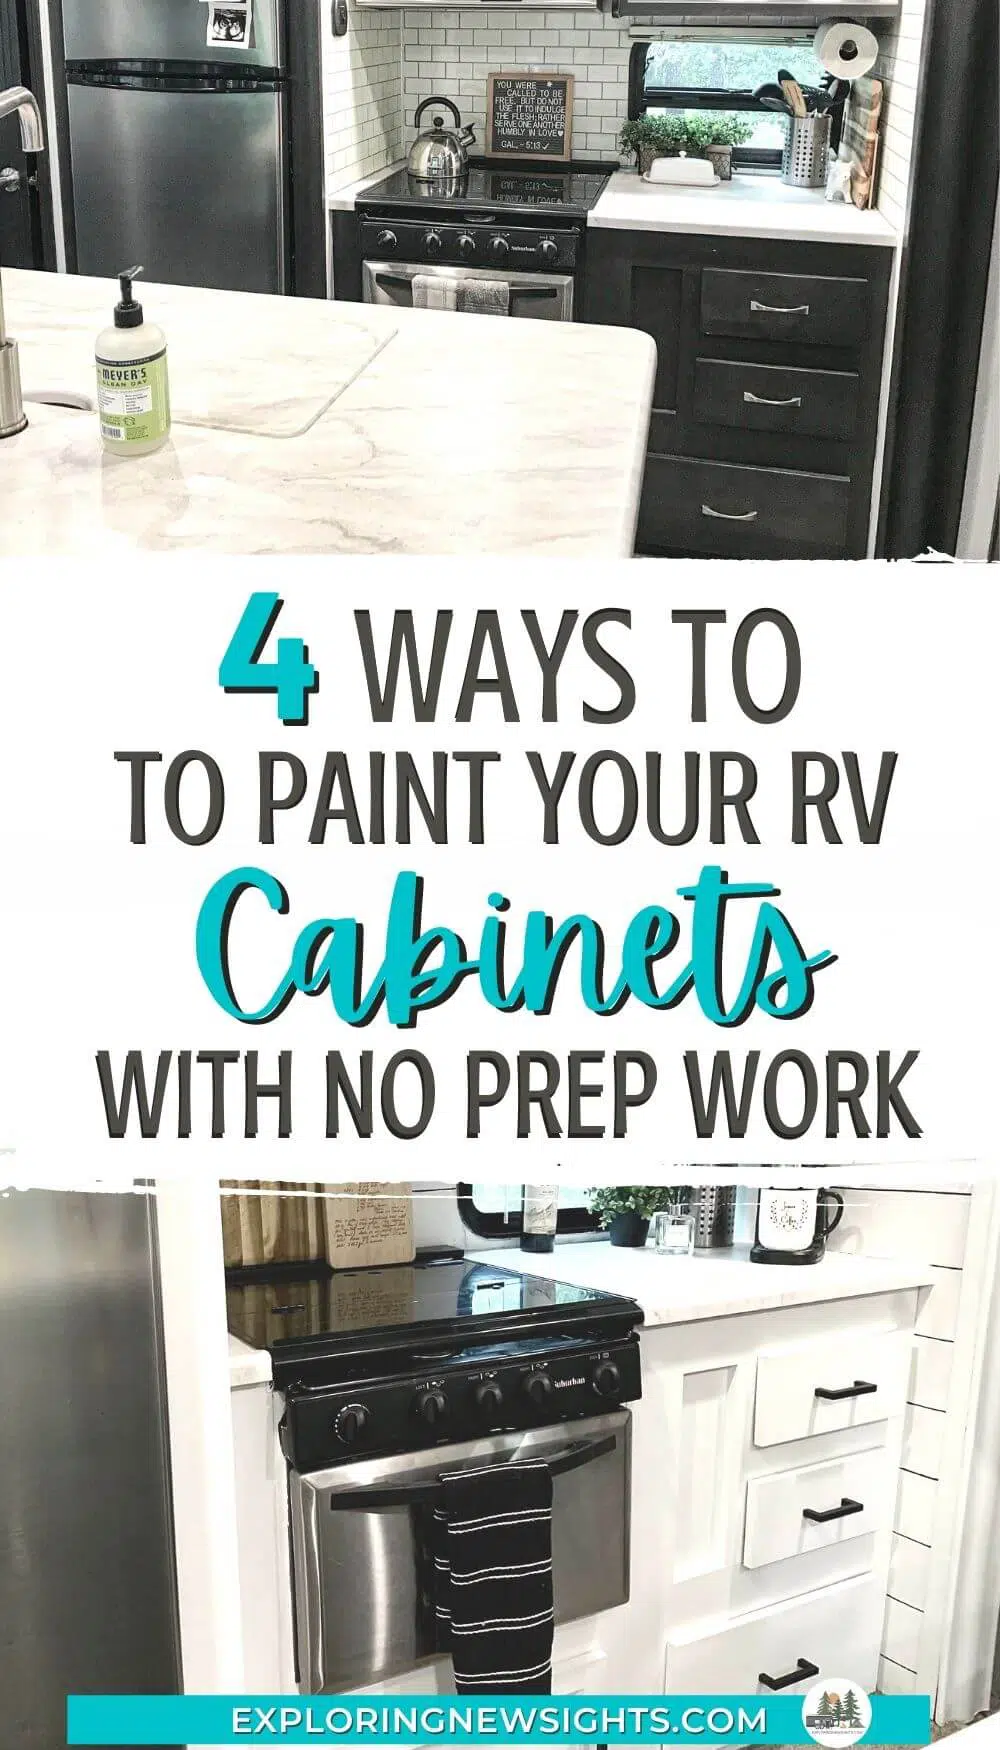 4 Ways to Paint RV Cabinets